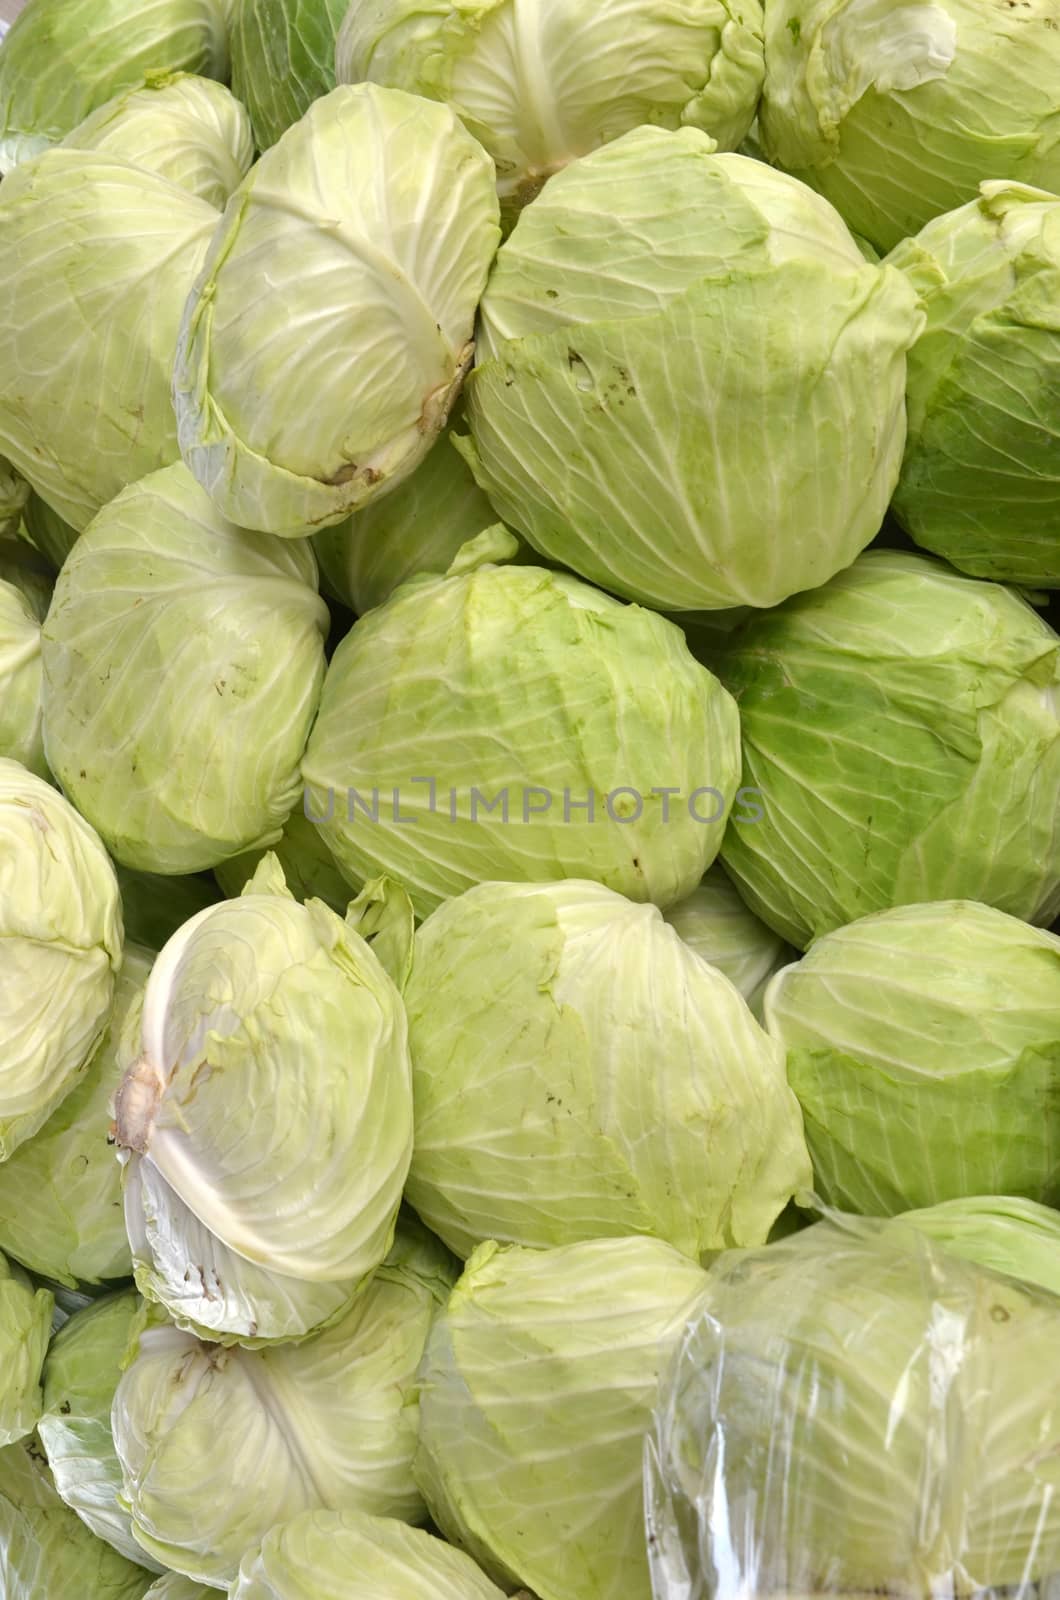 Cabbage on sale in the market